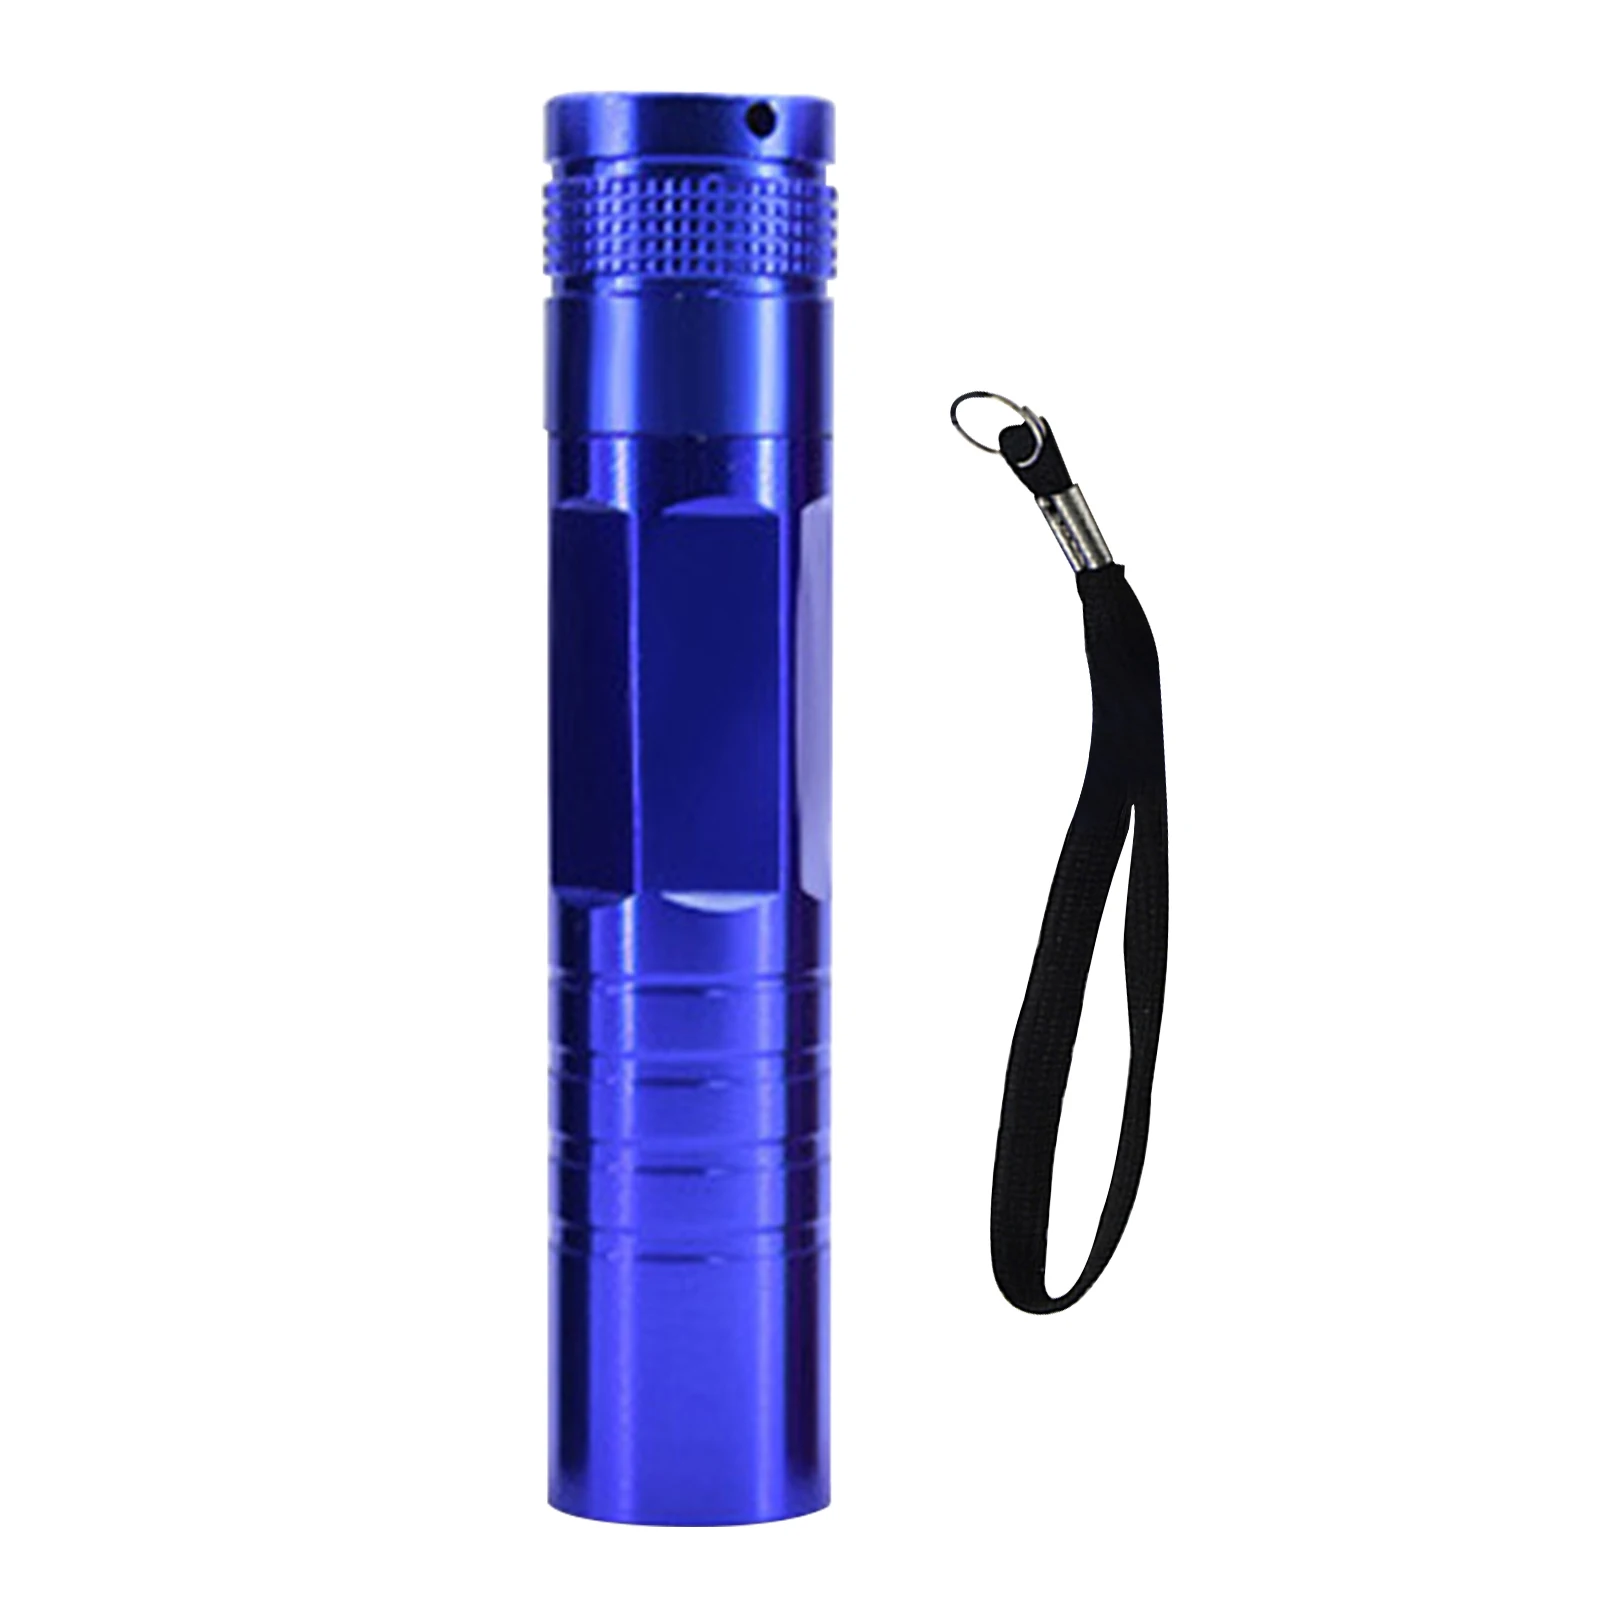 

With Lanyard Home Travel 250lm Handheld Aluminum Alloy Outdoor Camping Portable Battery Powered Daily Waterproof Mini Flashlight